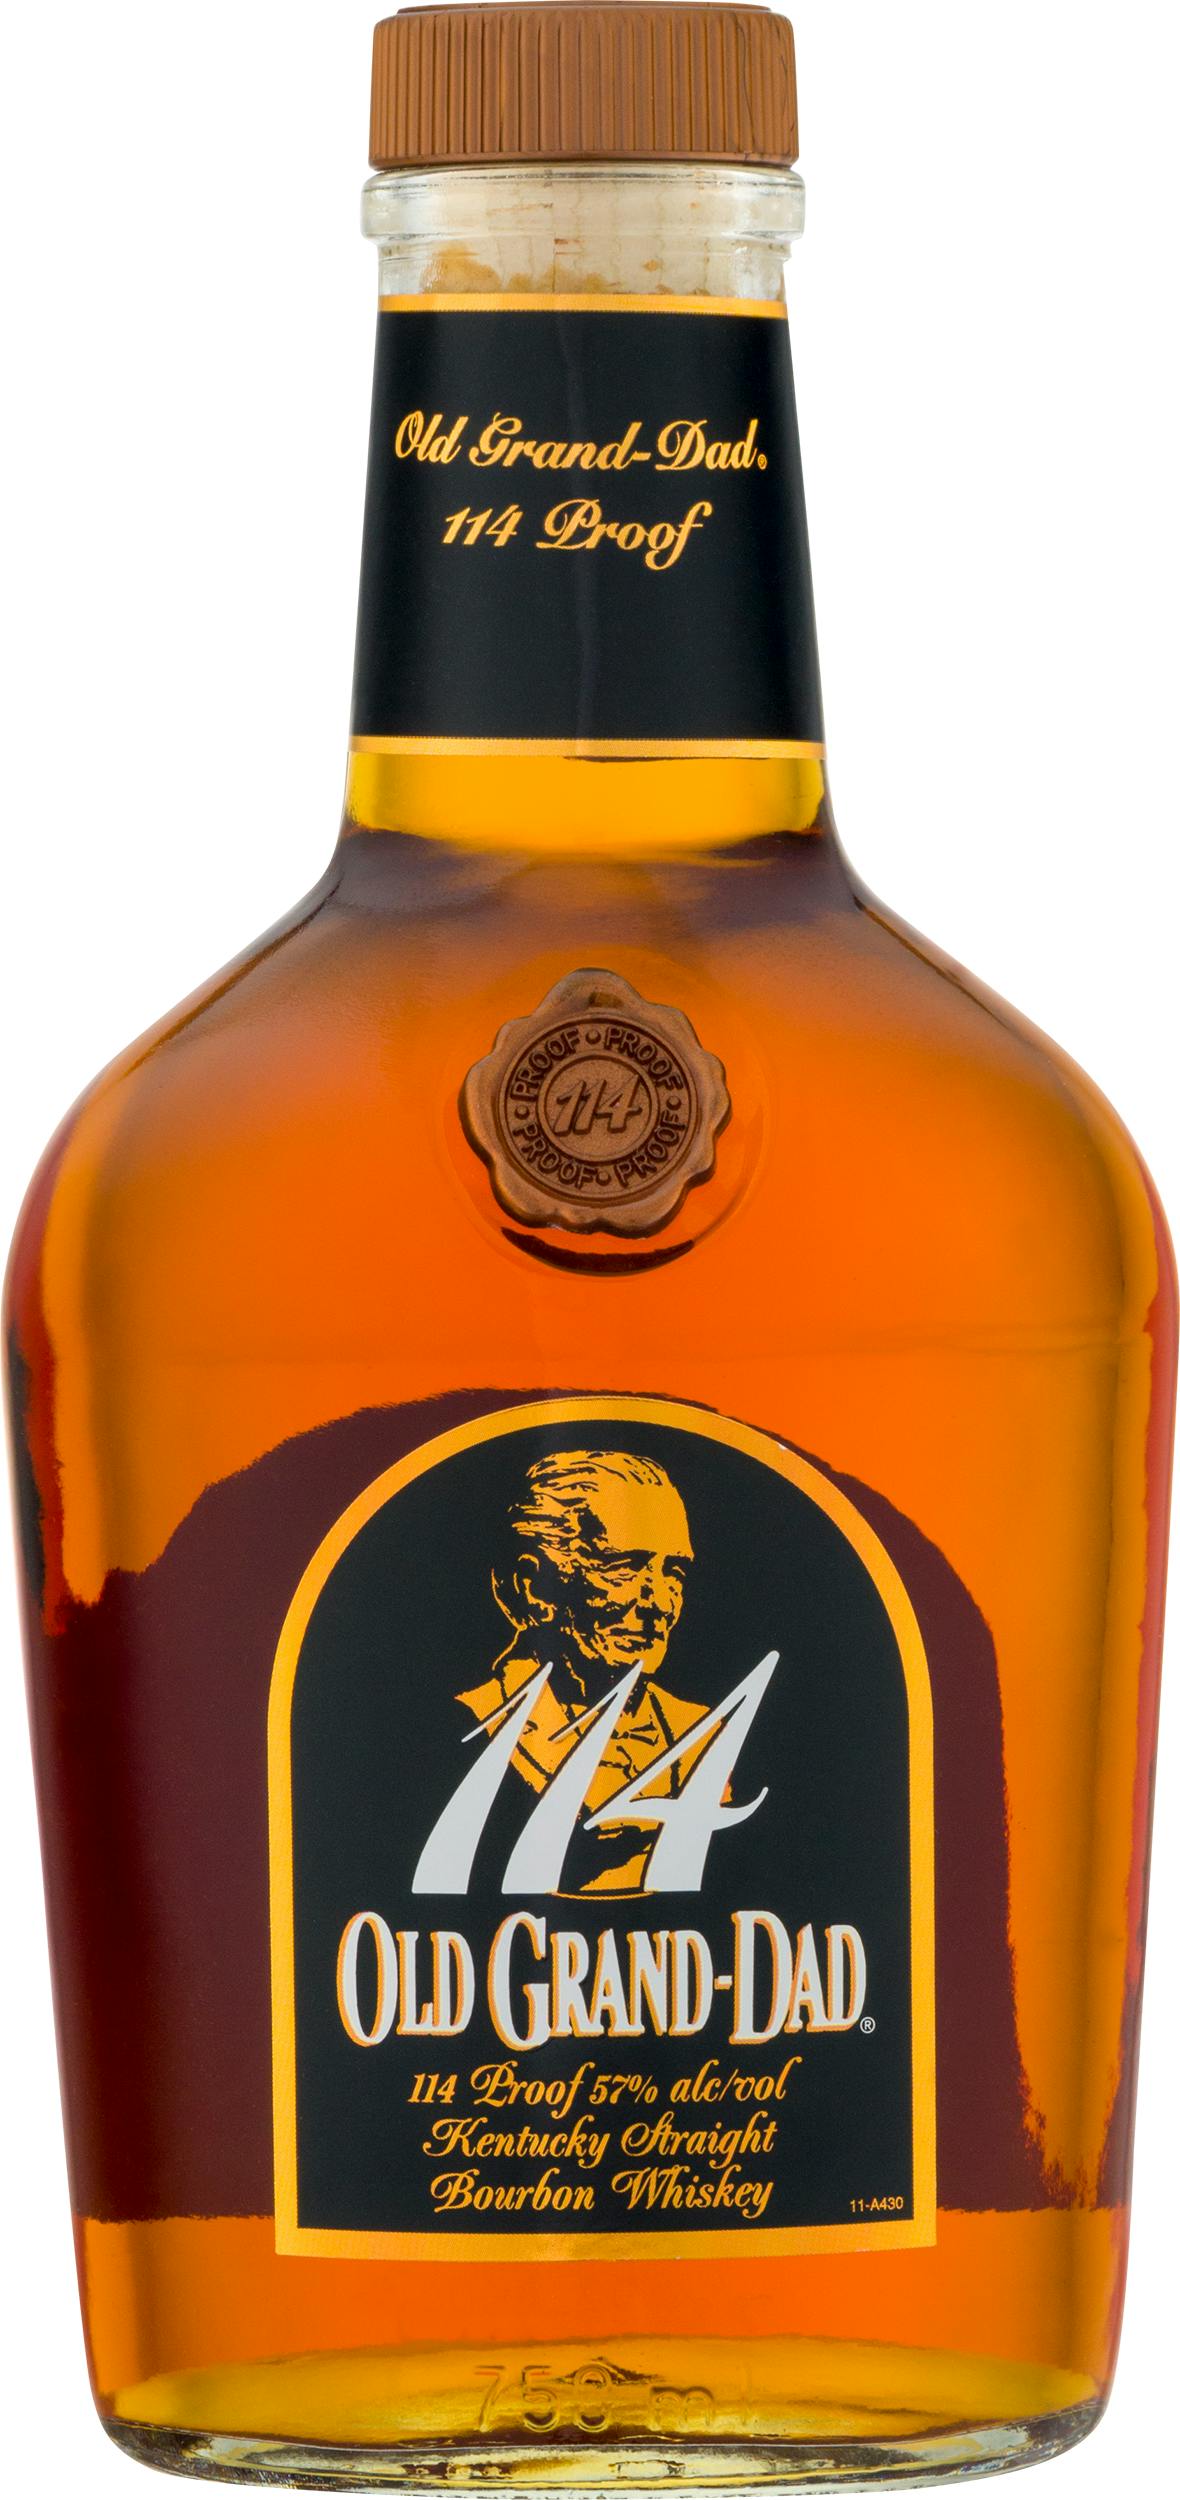 Old Grand-Dad Kentucky Straight Bourbon Whiskey 114 proof